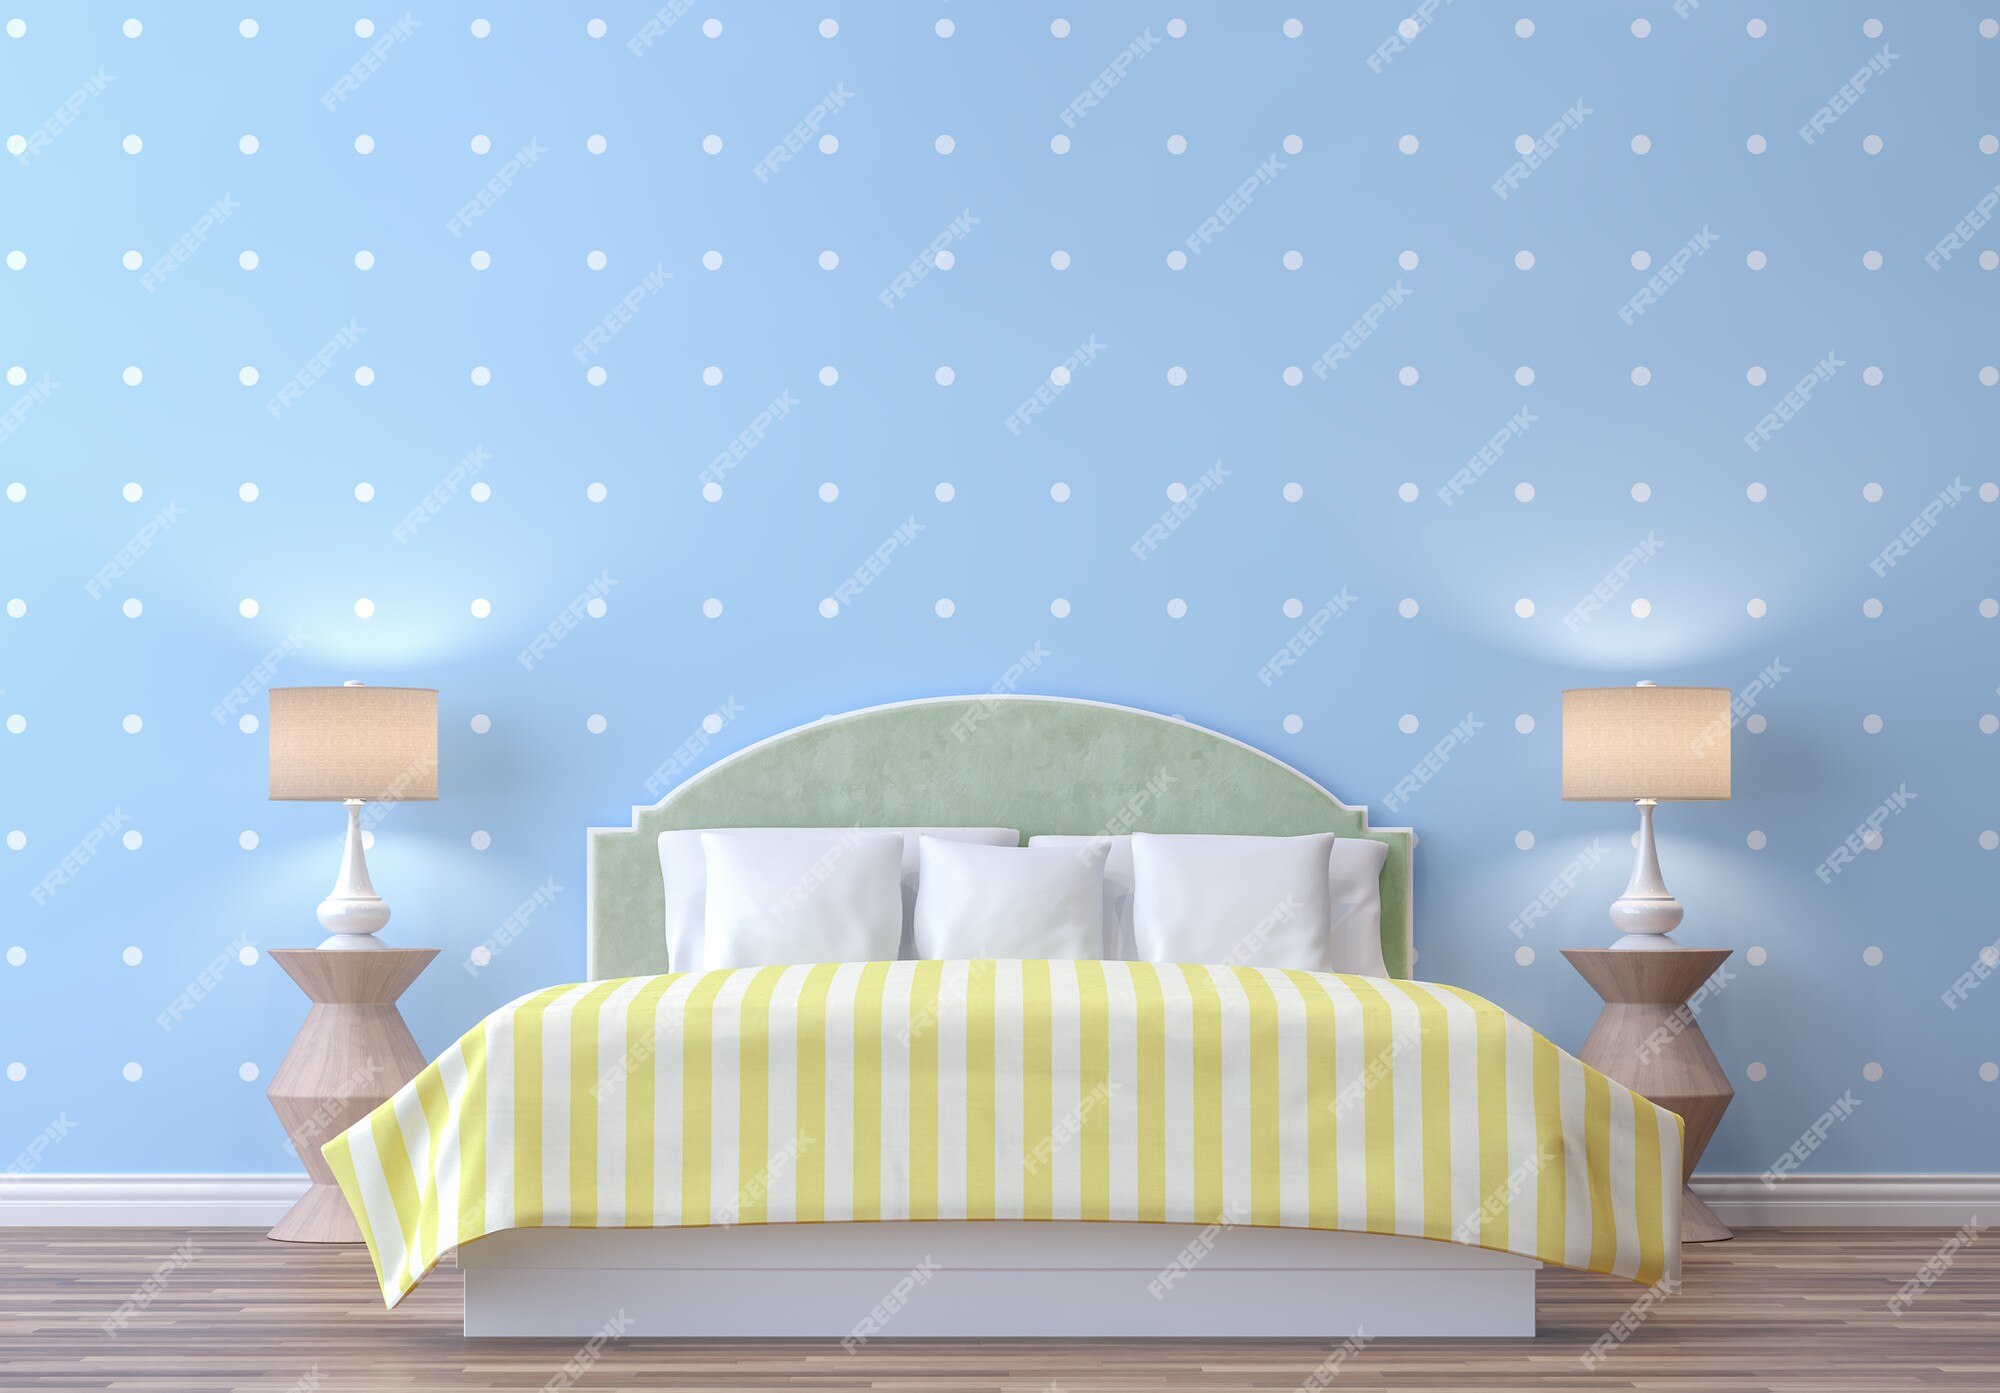 Premium Photo | Colorful pastel bedroom with blue and white dot wallpaper  3d render